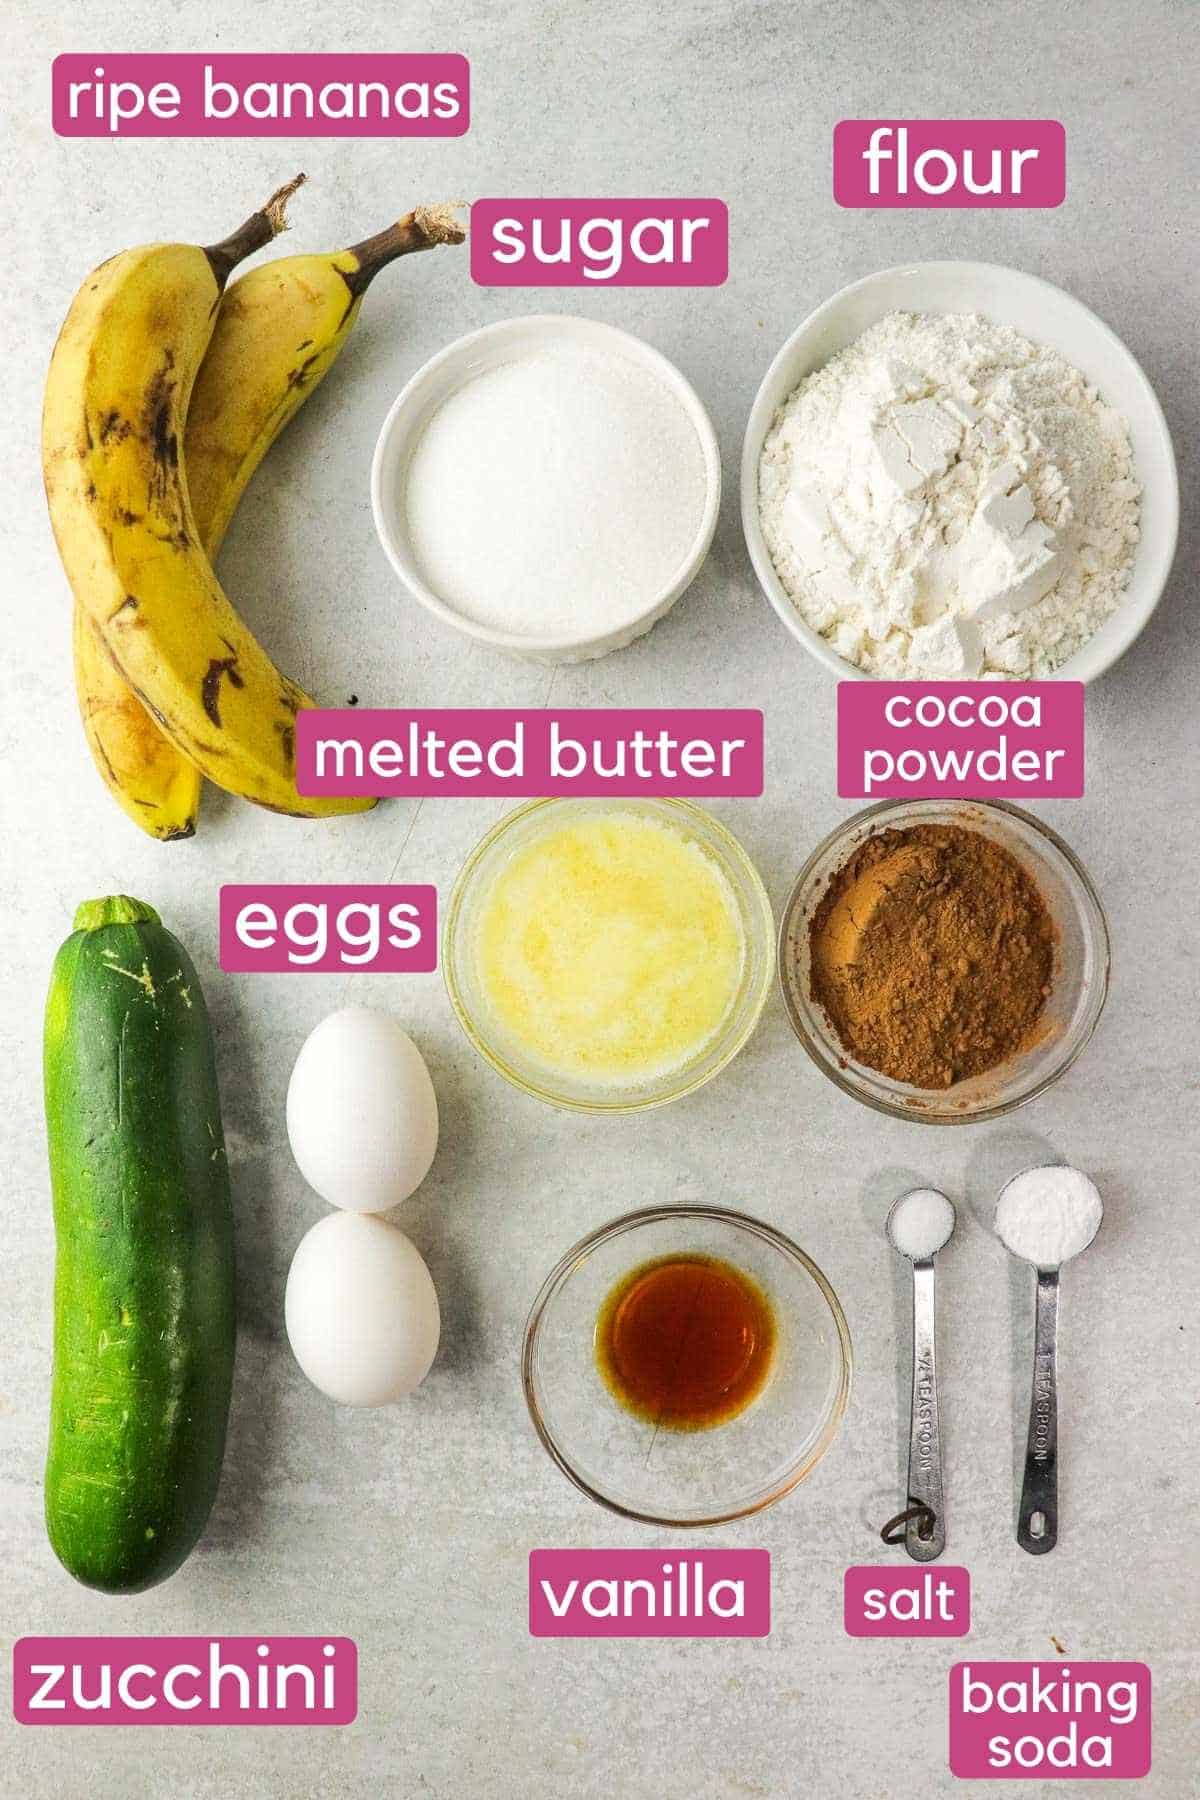 The ingredients needed to make zucchini banana chocolate chip muffins, including zucchini and ripe bananas.